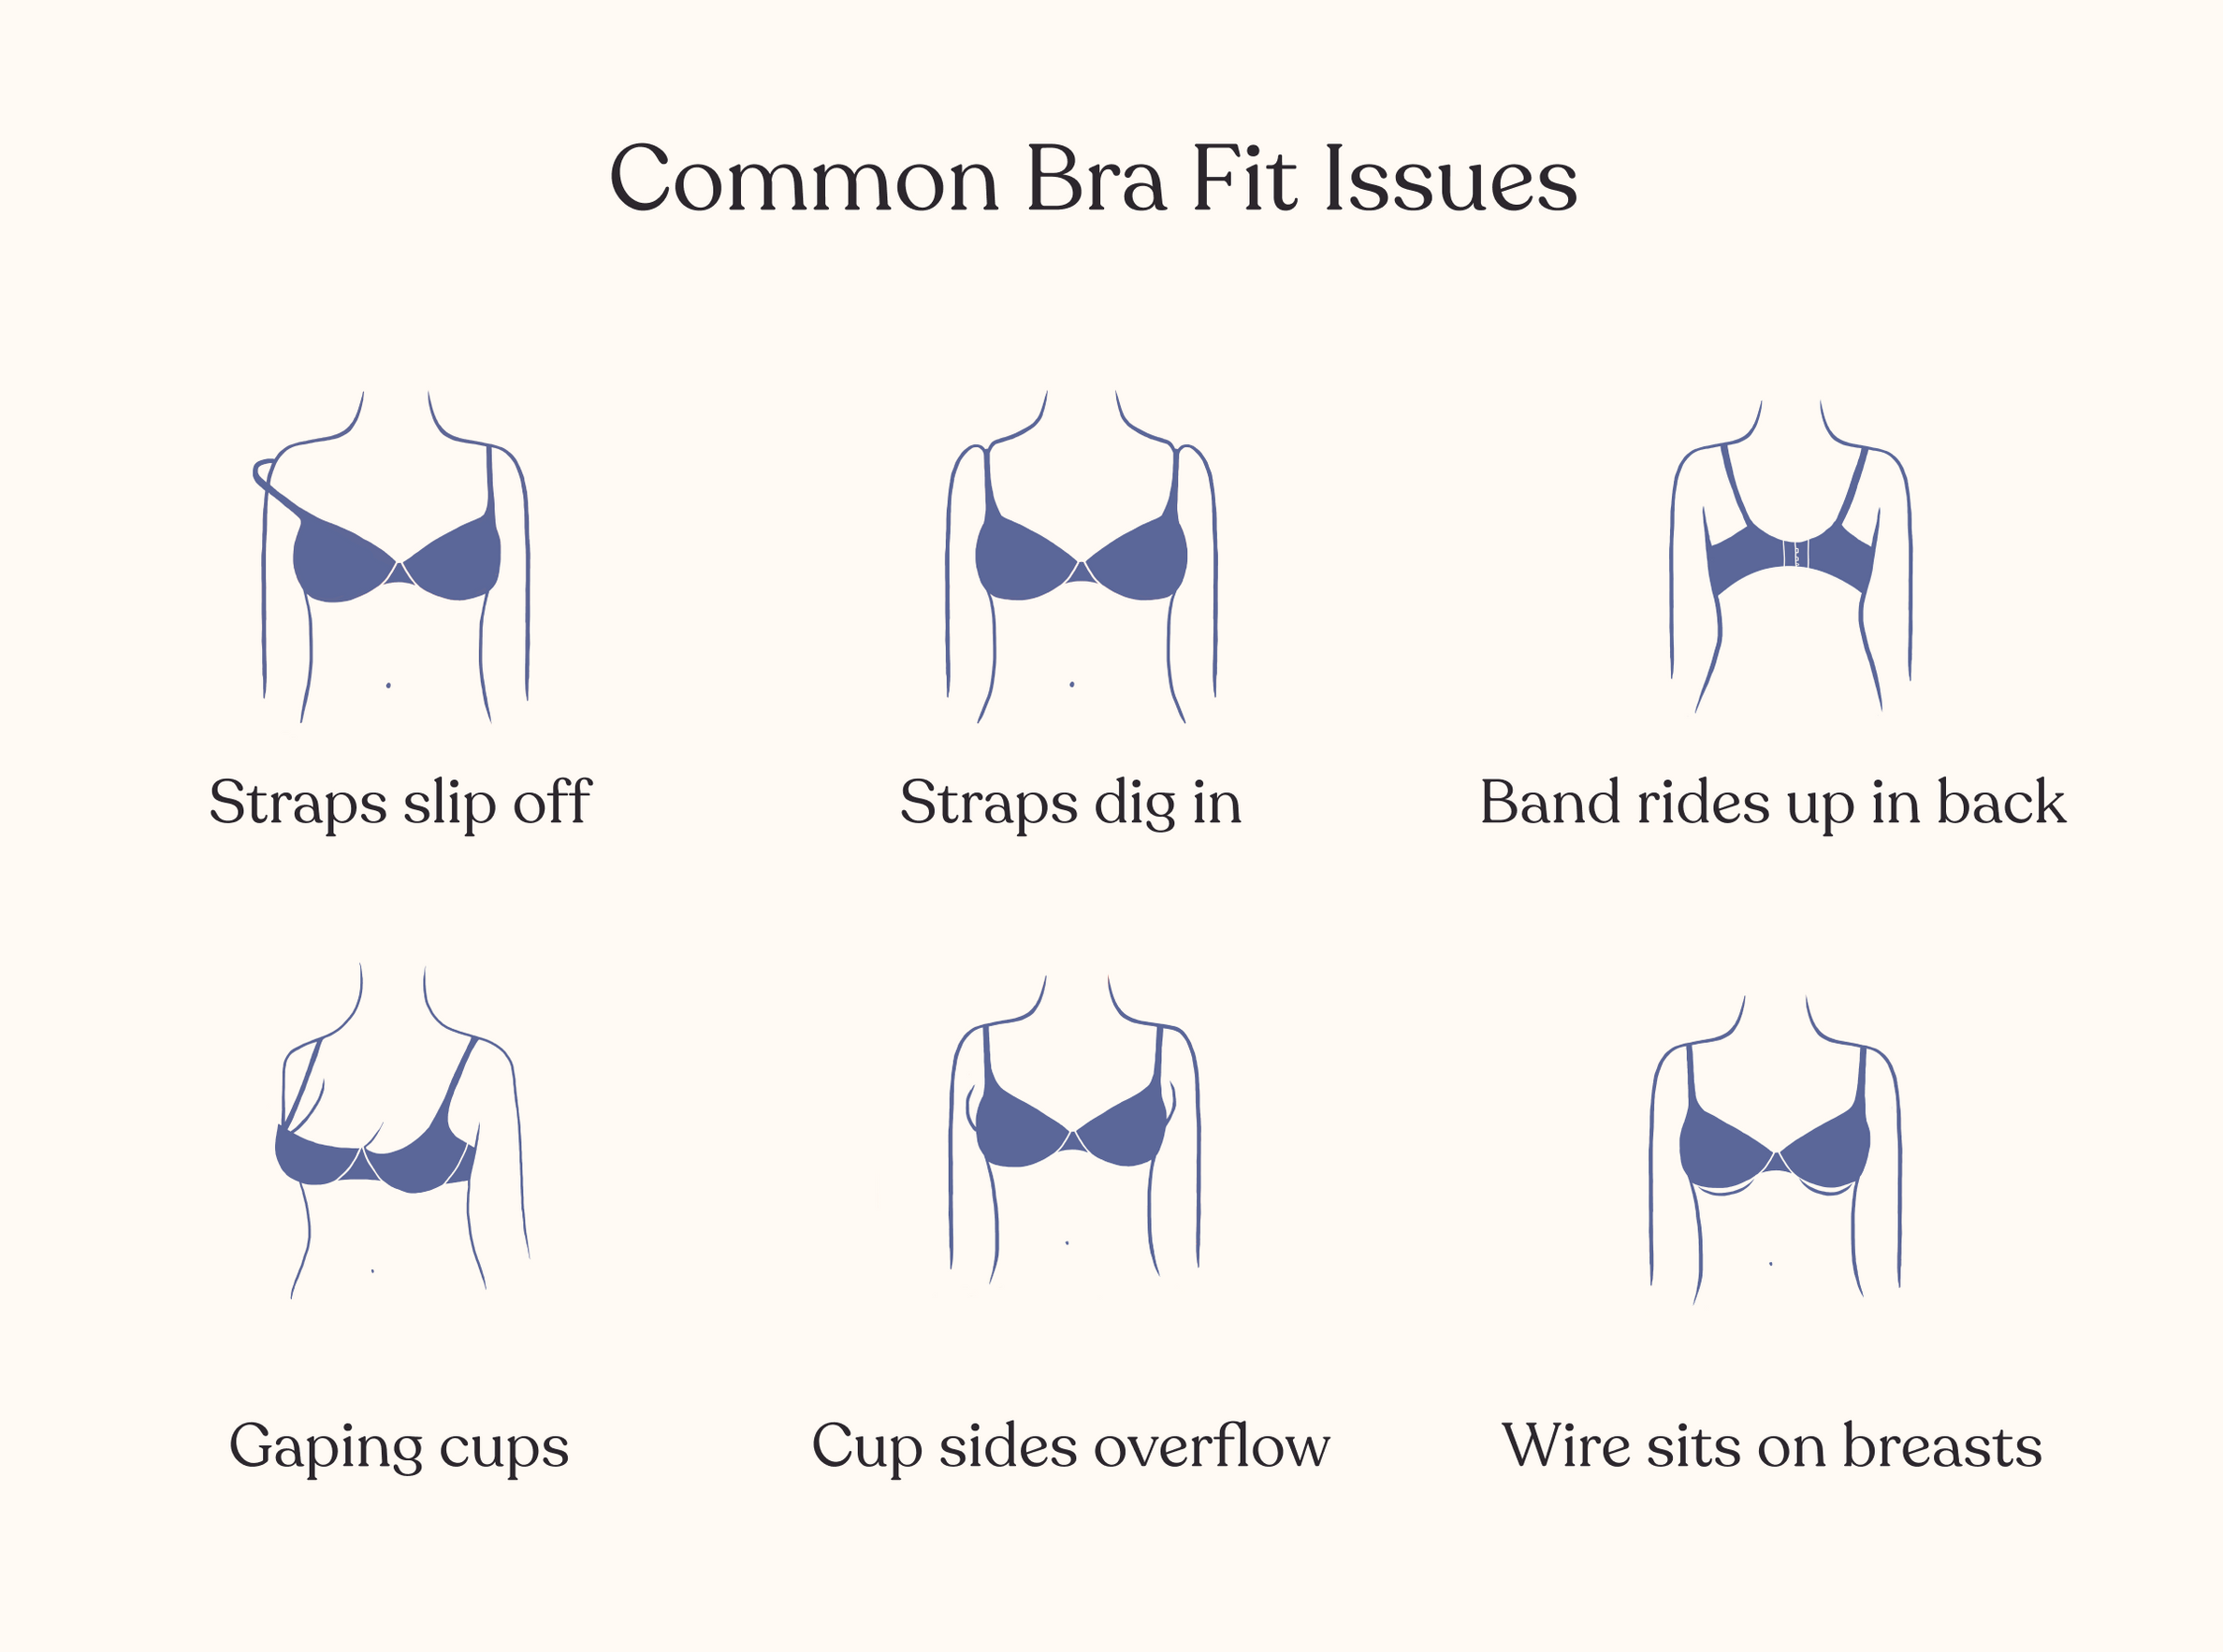 7 Common Bra Fit Issues & How to Solve Them - Solutions to Common